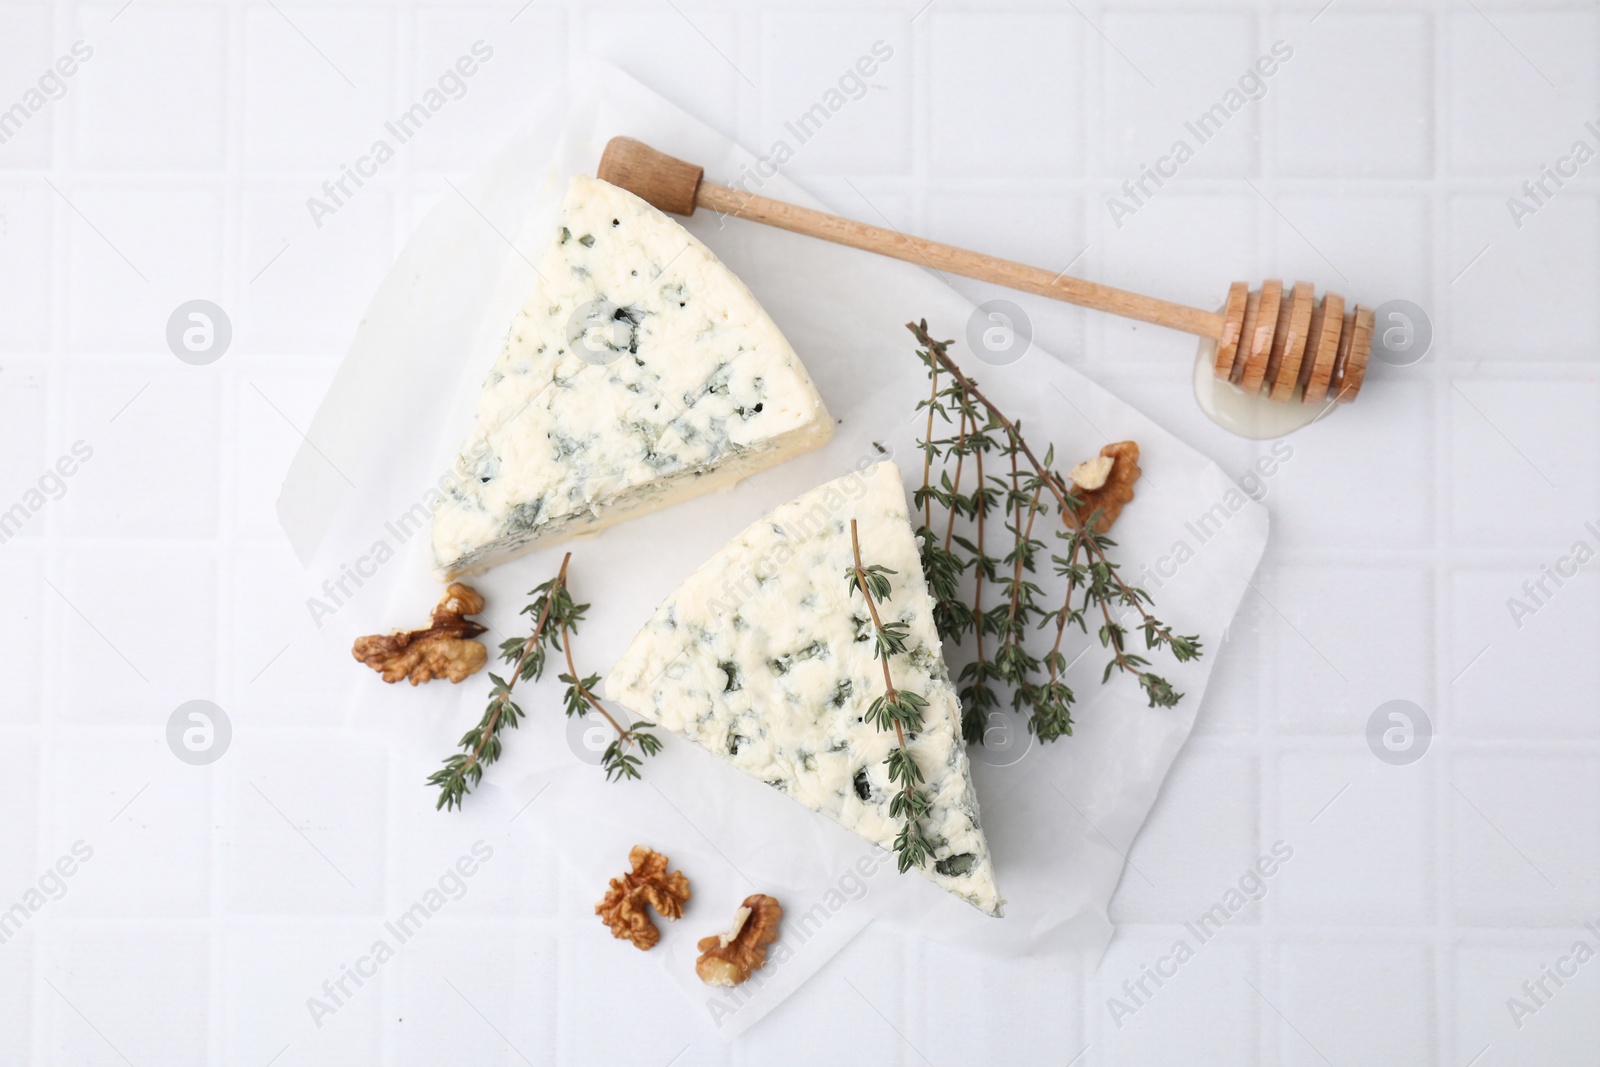 Photo of Tasty blue cheese with thyme, walnuts and honey dipper on white tiled table, flat lay